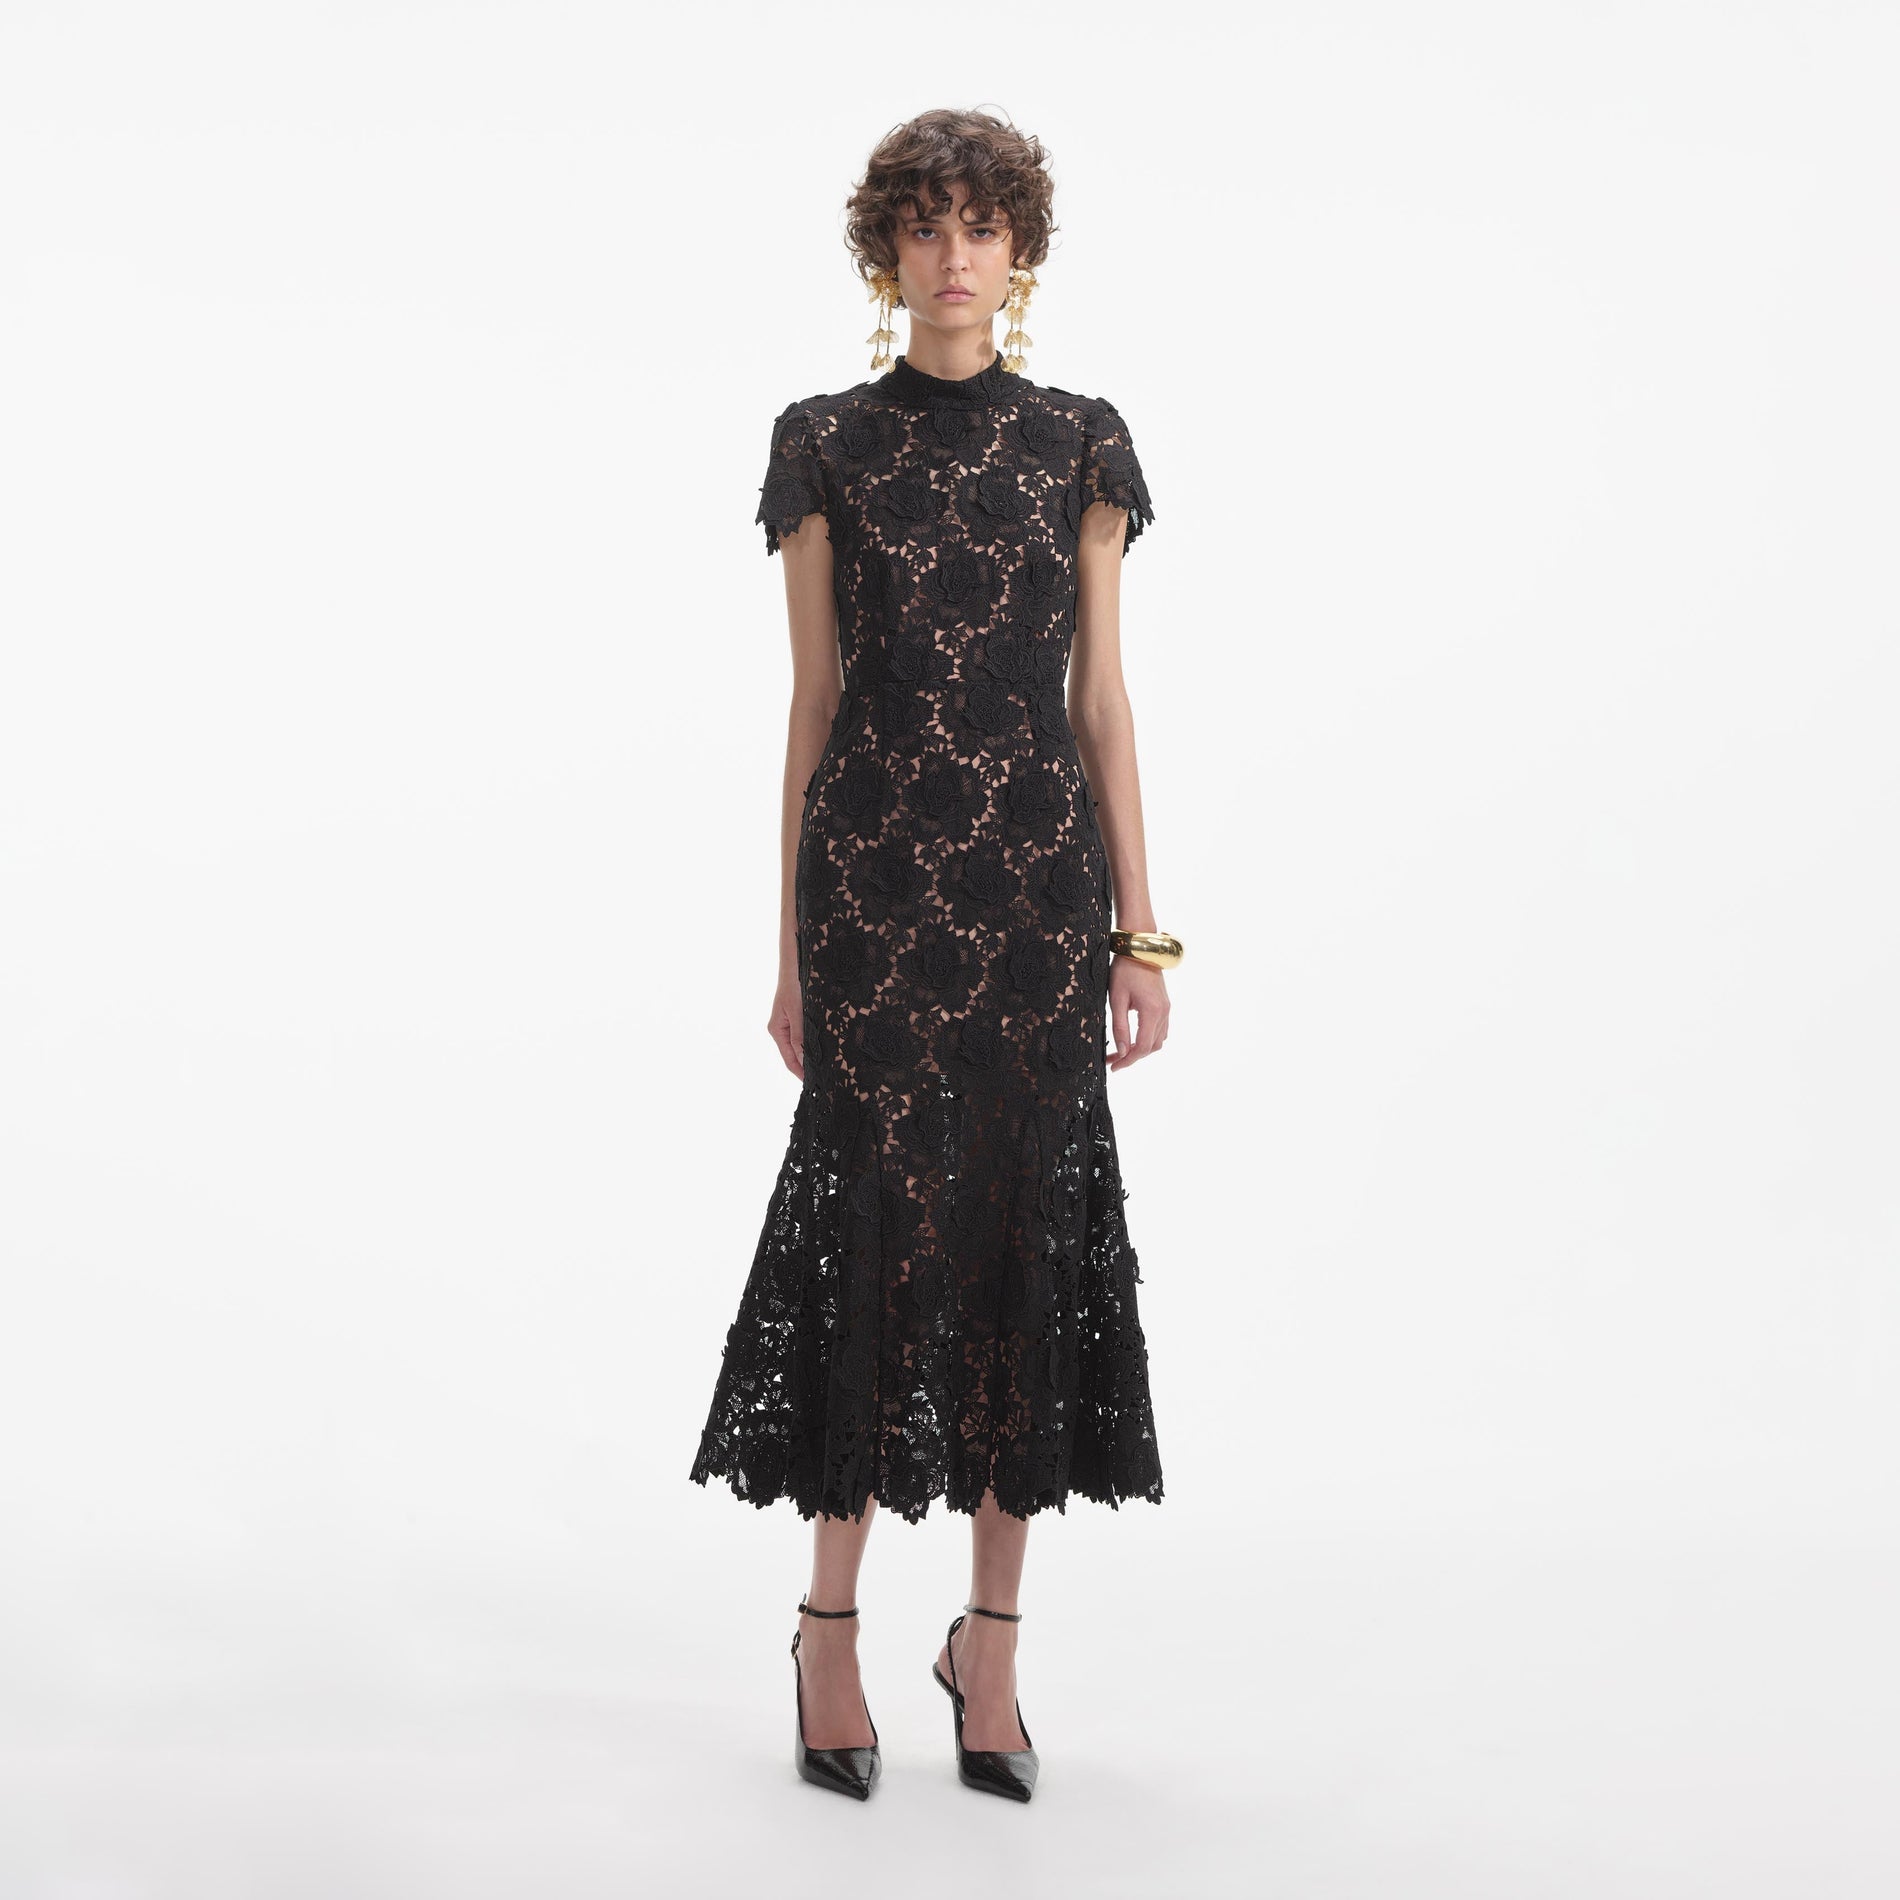 Front view of a woman wearing the Black Flower Lace Midi Dress